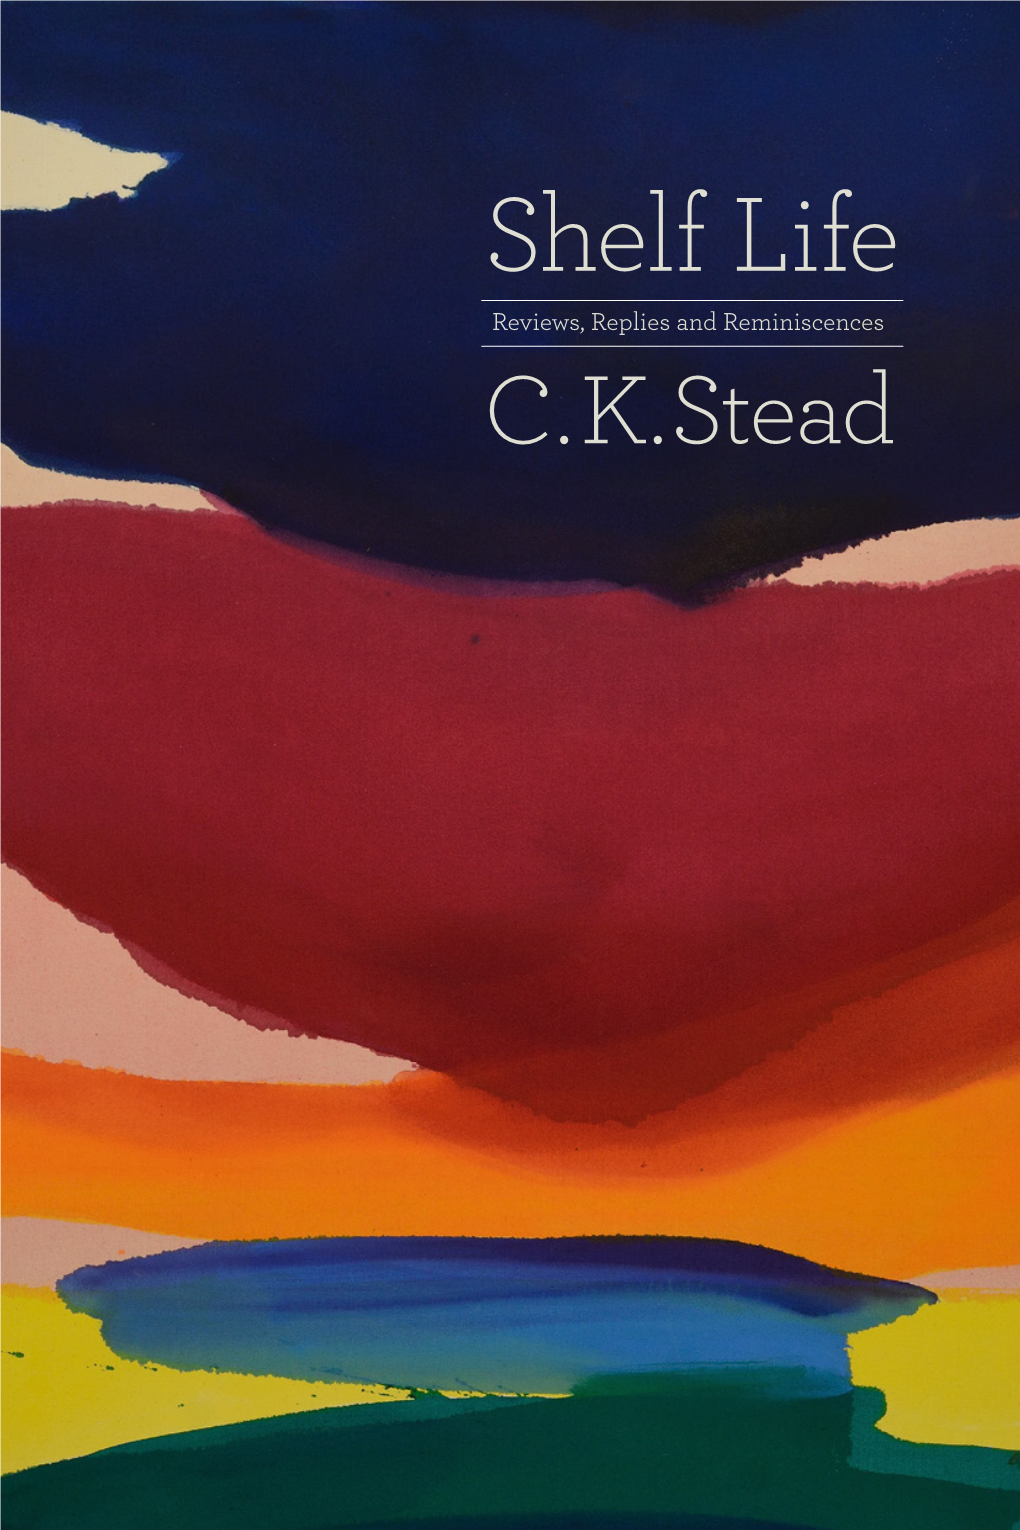 Shelf Life Reviews, Replies and Reminiscences C.K.Stead What Ghost Was Being Appeased? What Wrong Was Being Righted Or Sin Atoned For? I Didn’T Know